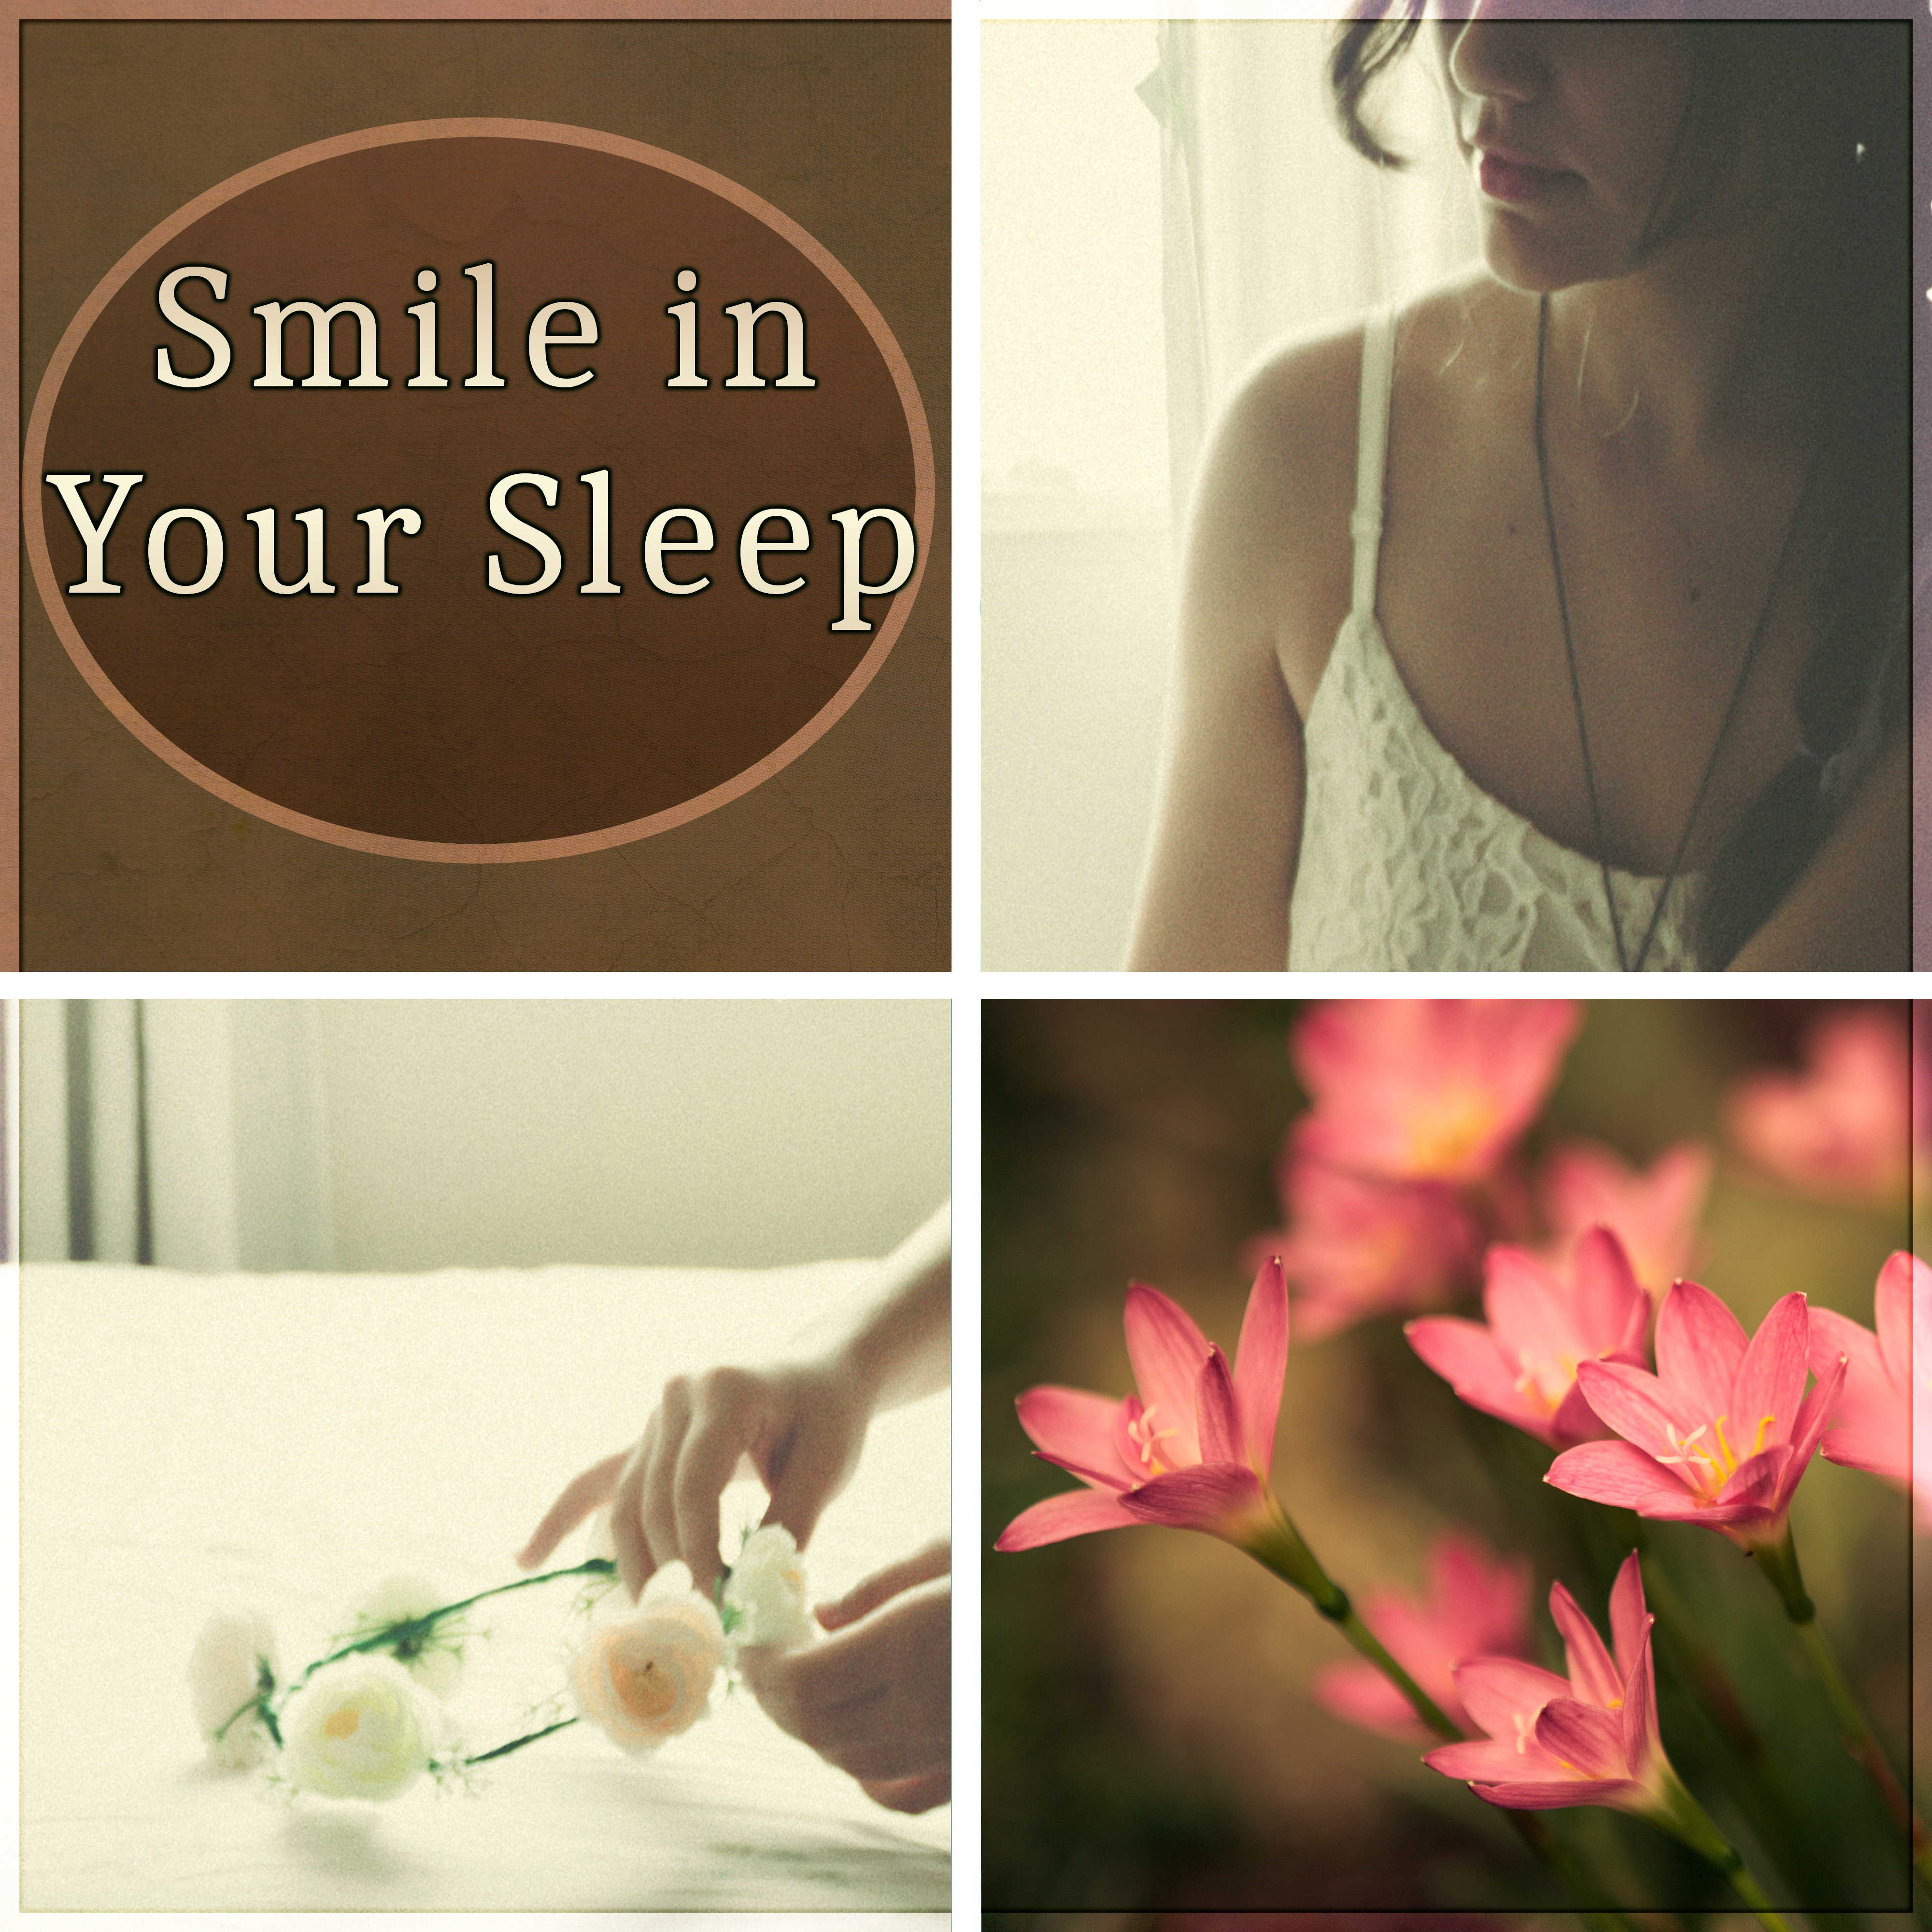 Smile in Your Sleep - Nature Sounds Lullabies to Meditate and Calm Down, Natural White Noise, Songs to Relax & Heal